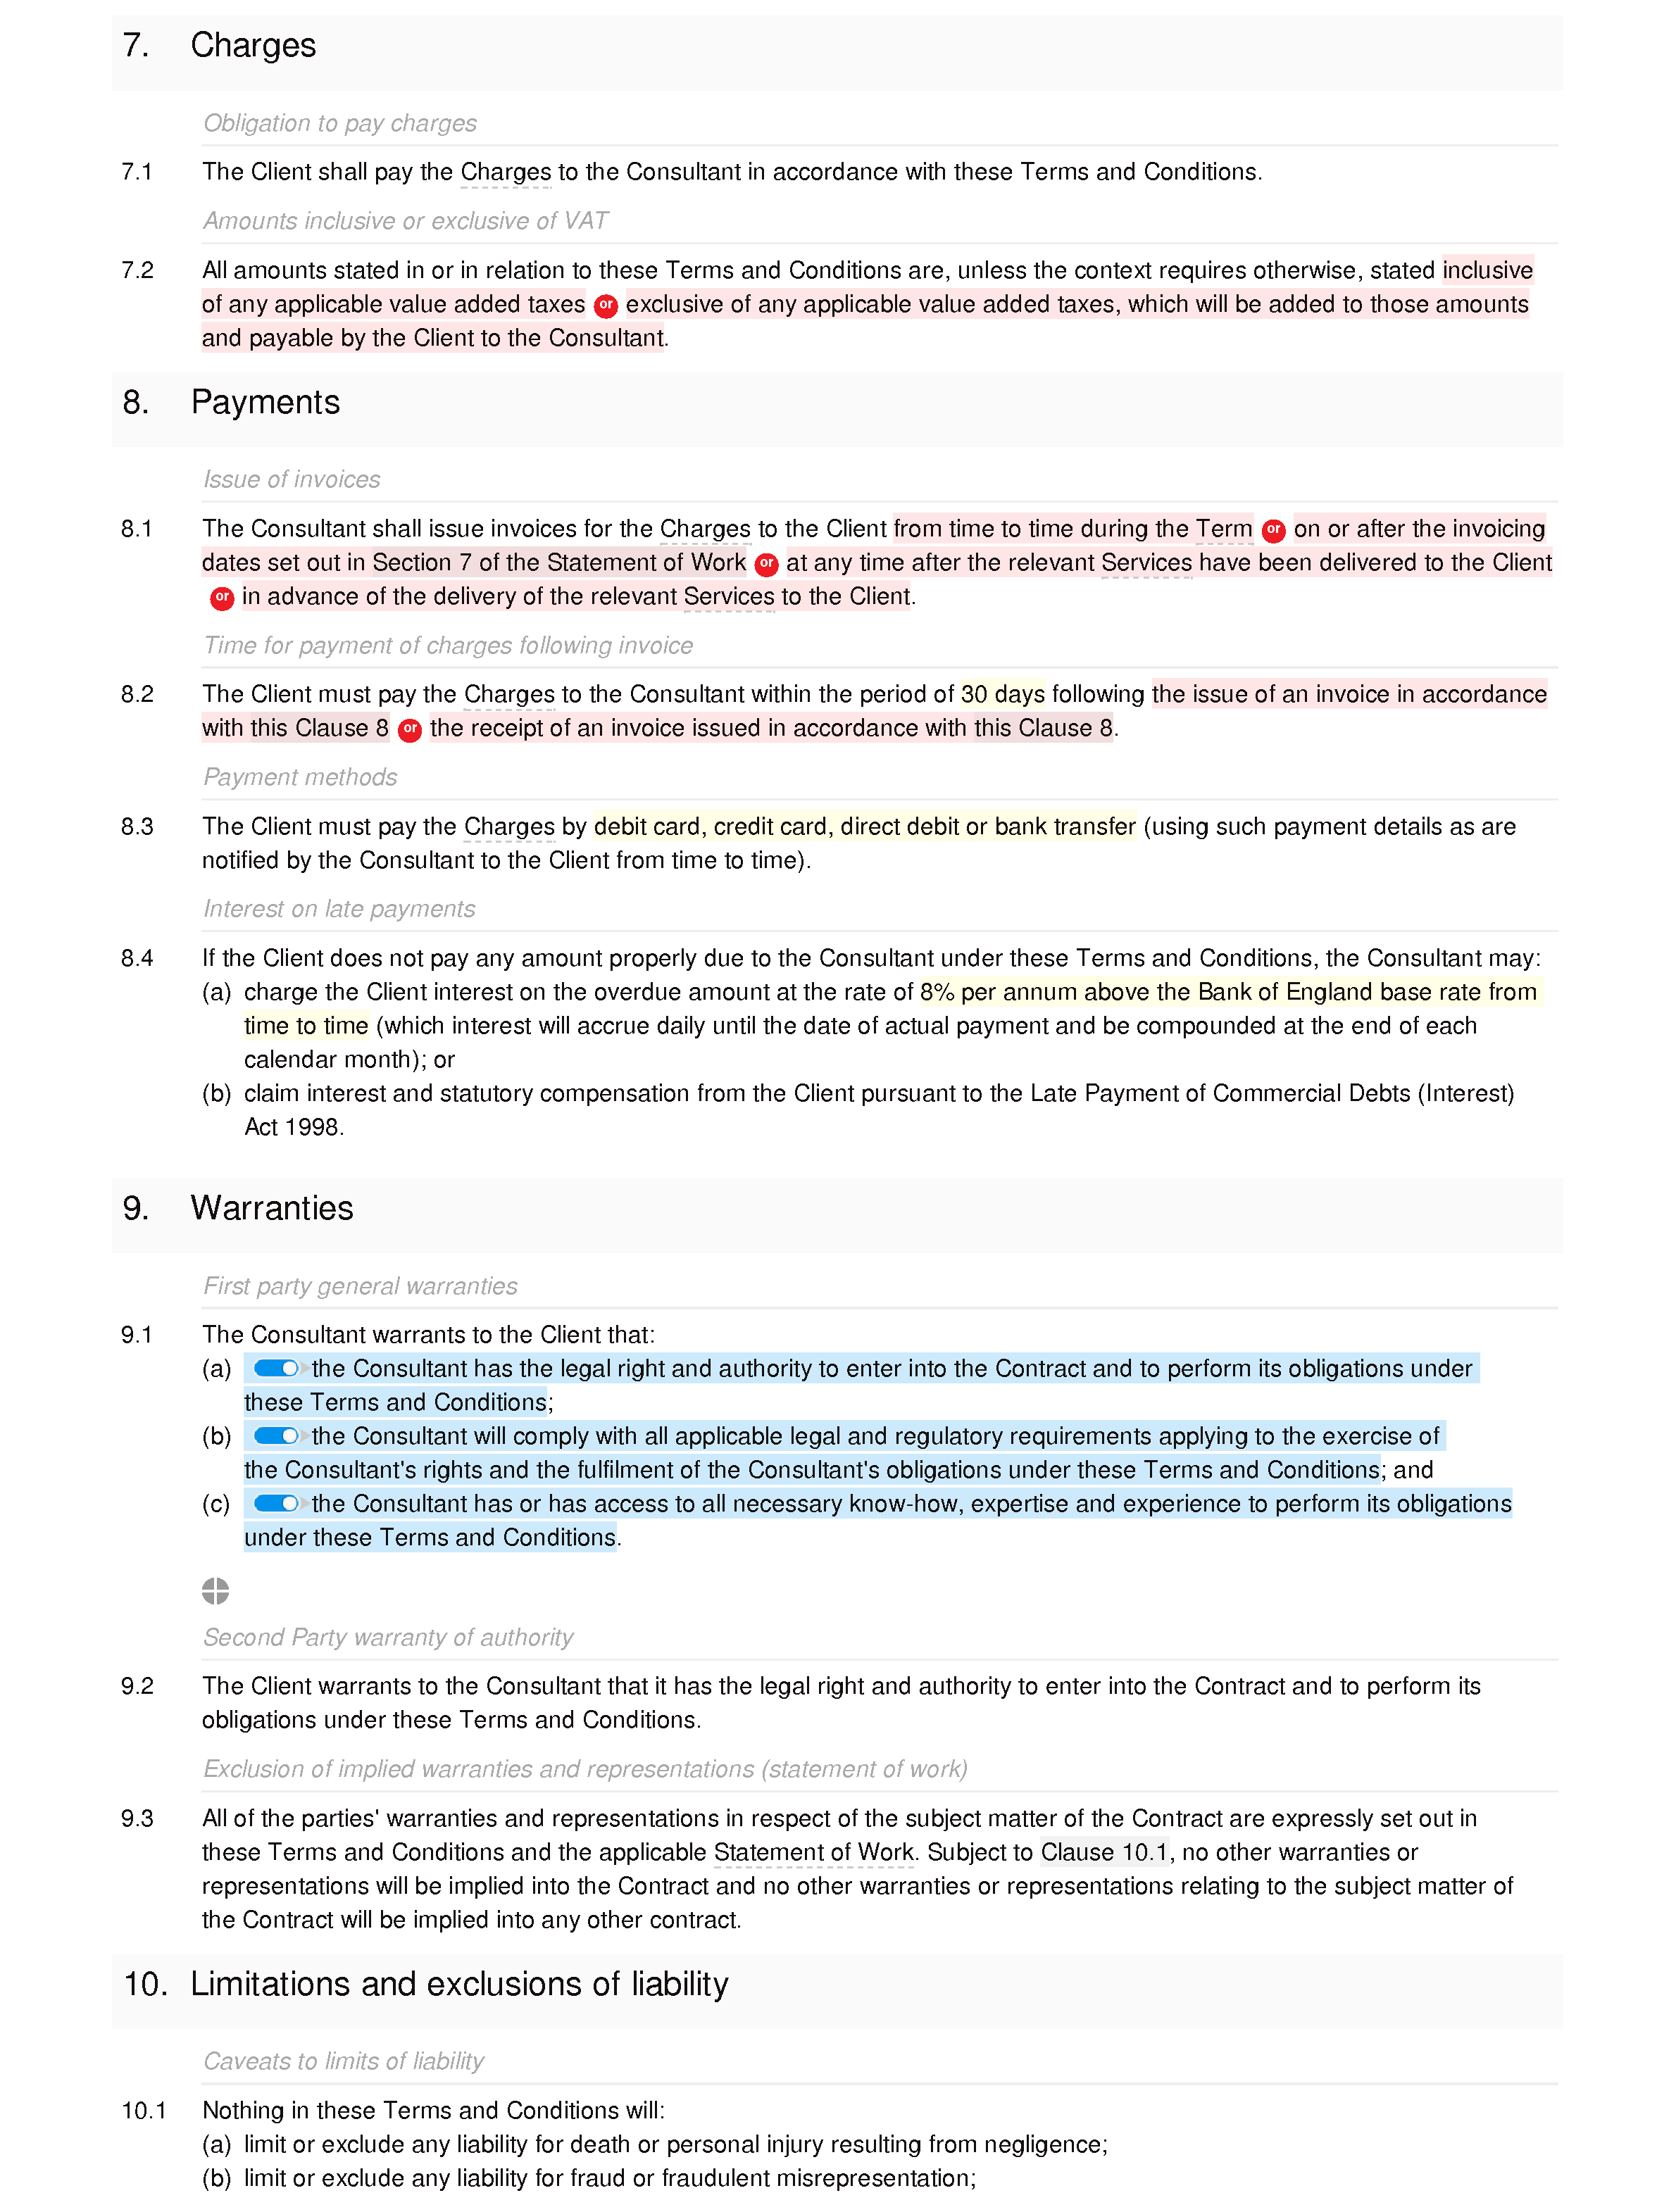 Free consultancy terms and conditions document editor preview